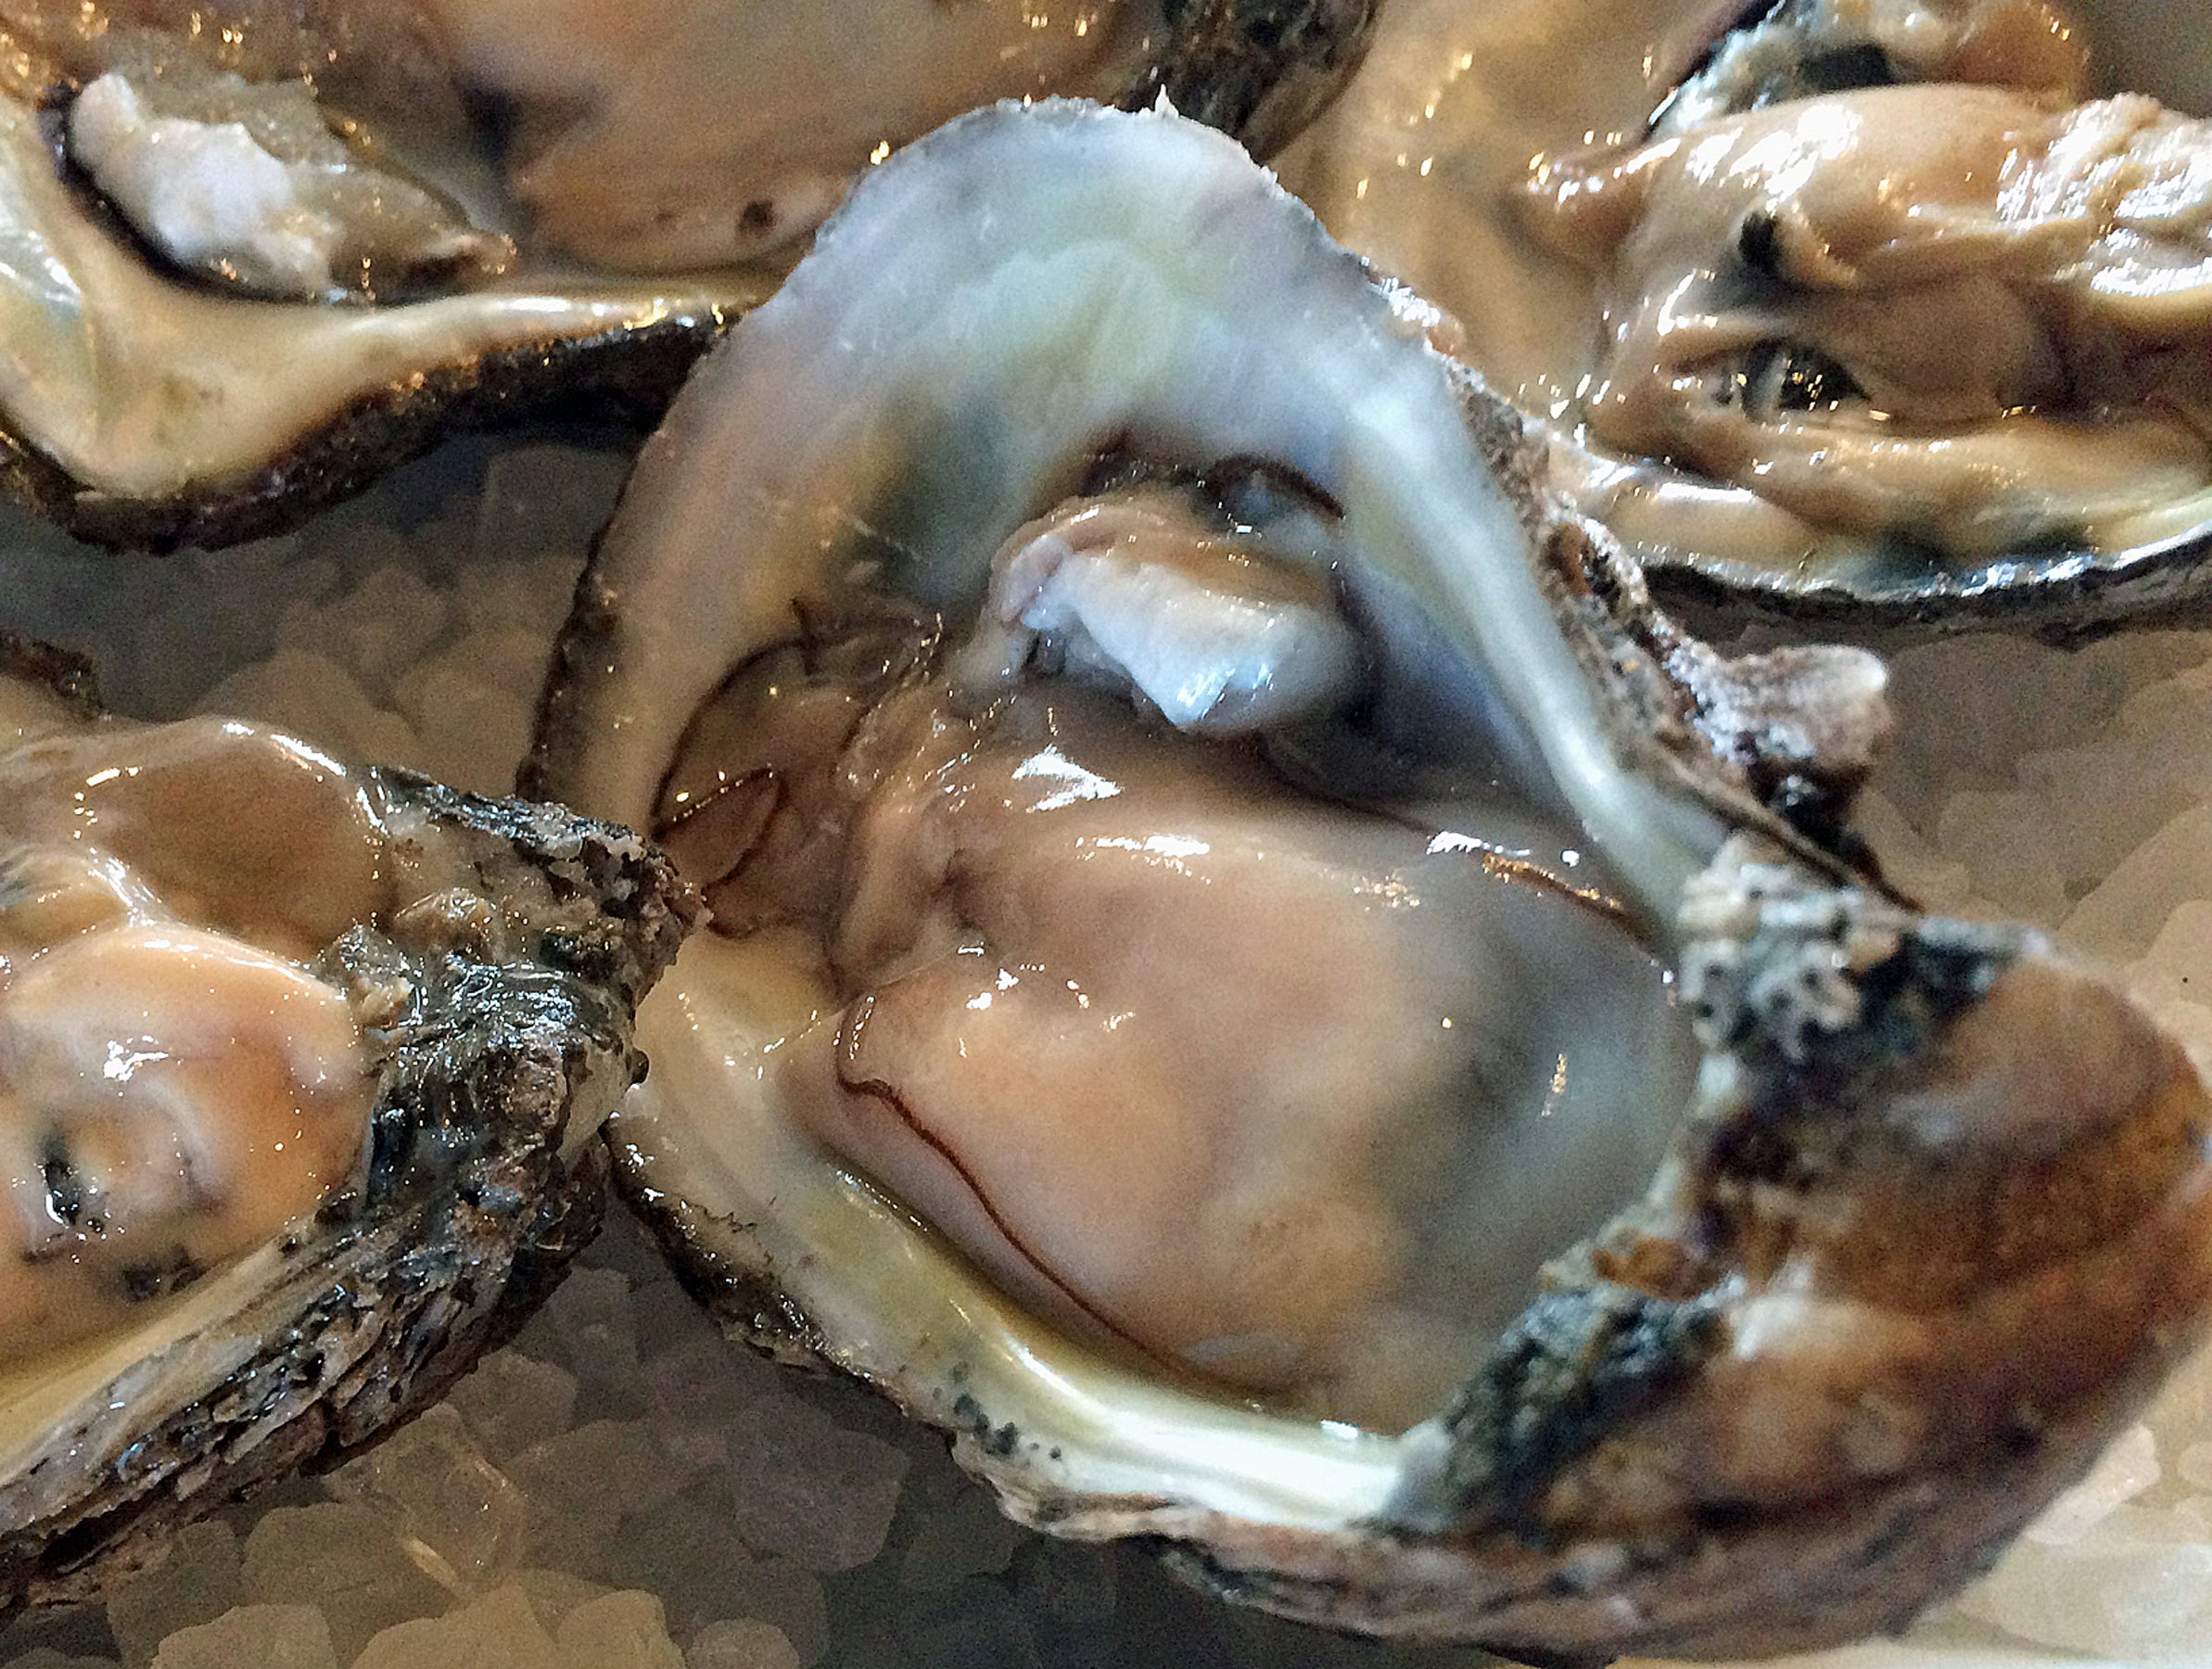 Alabama Oyster Community Meeting to be held October 1